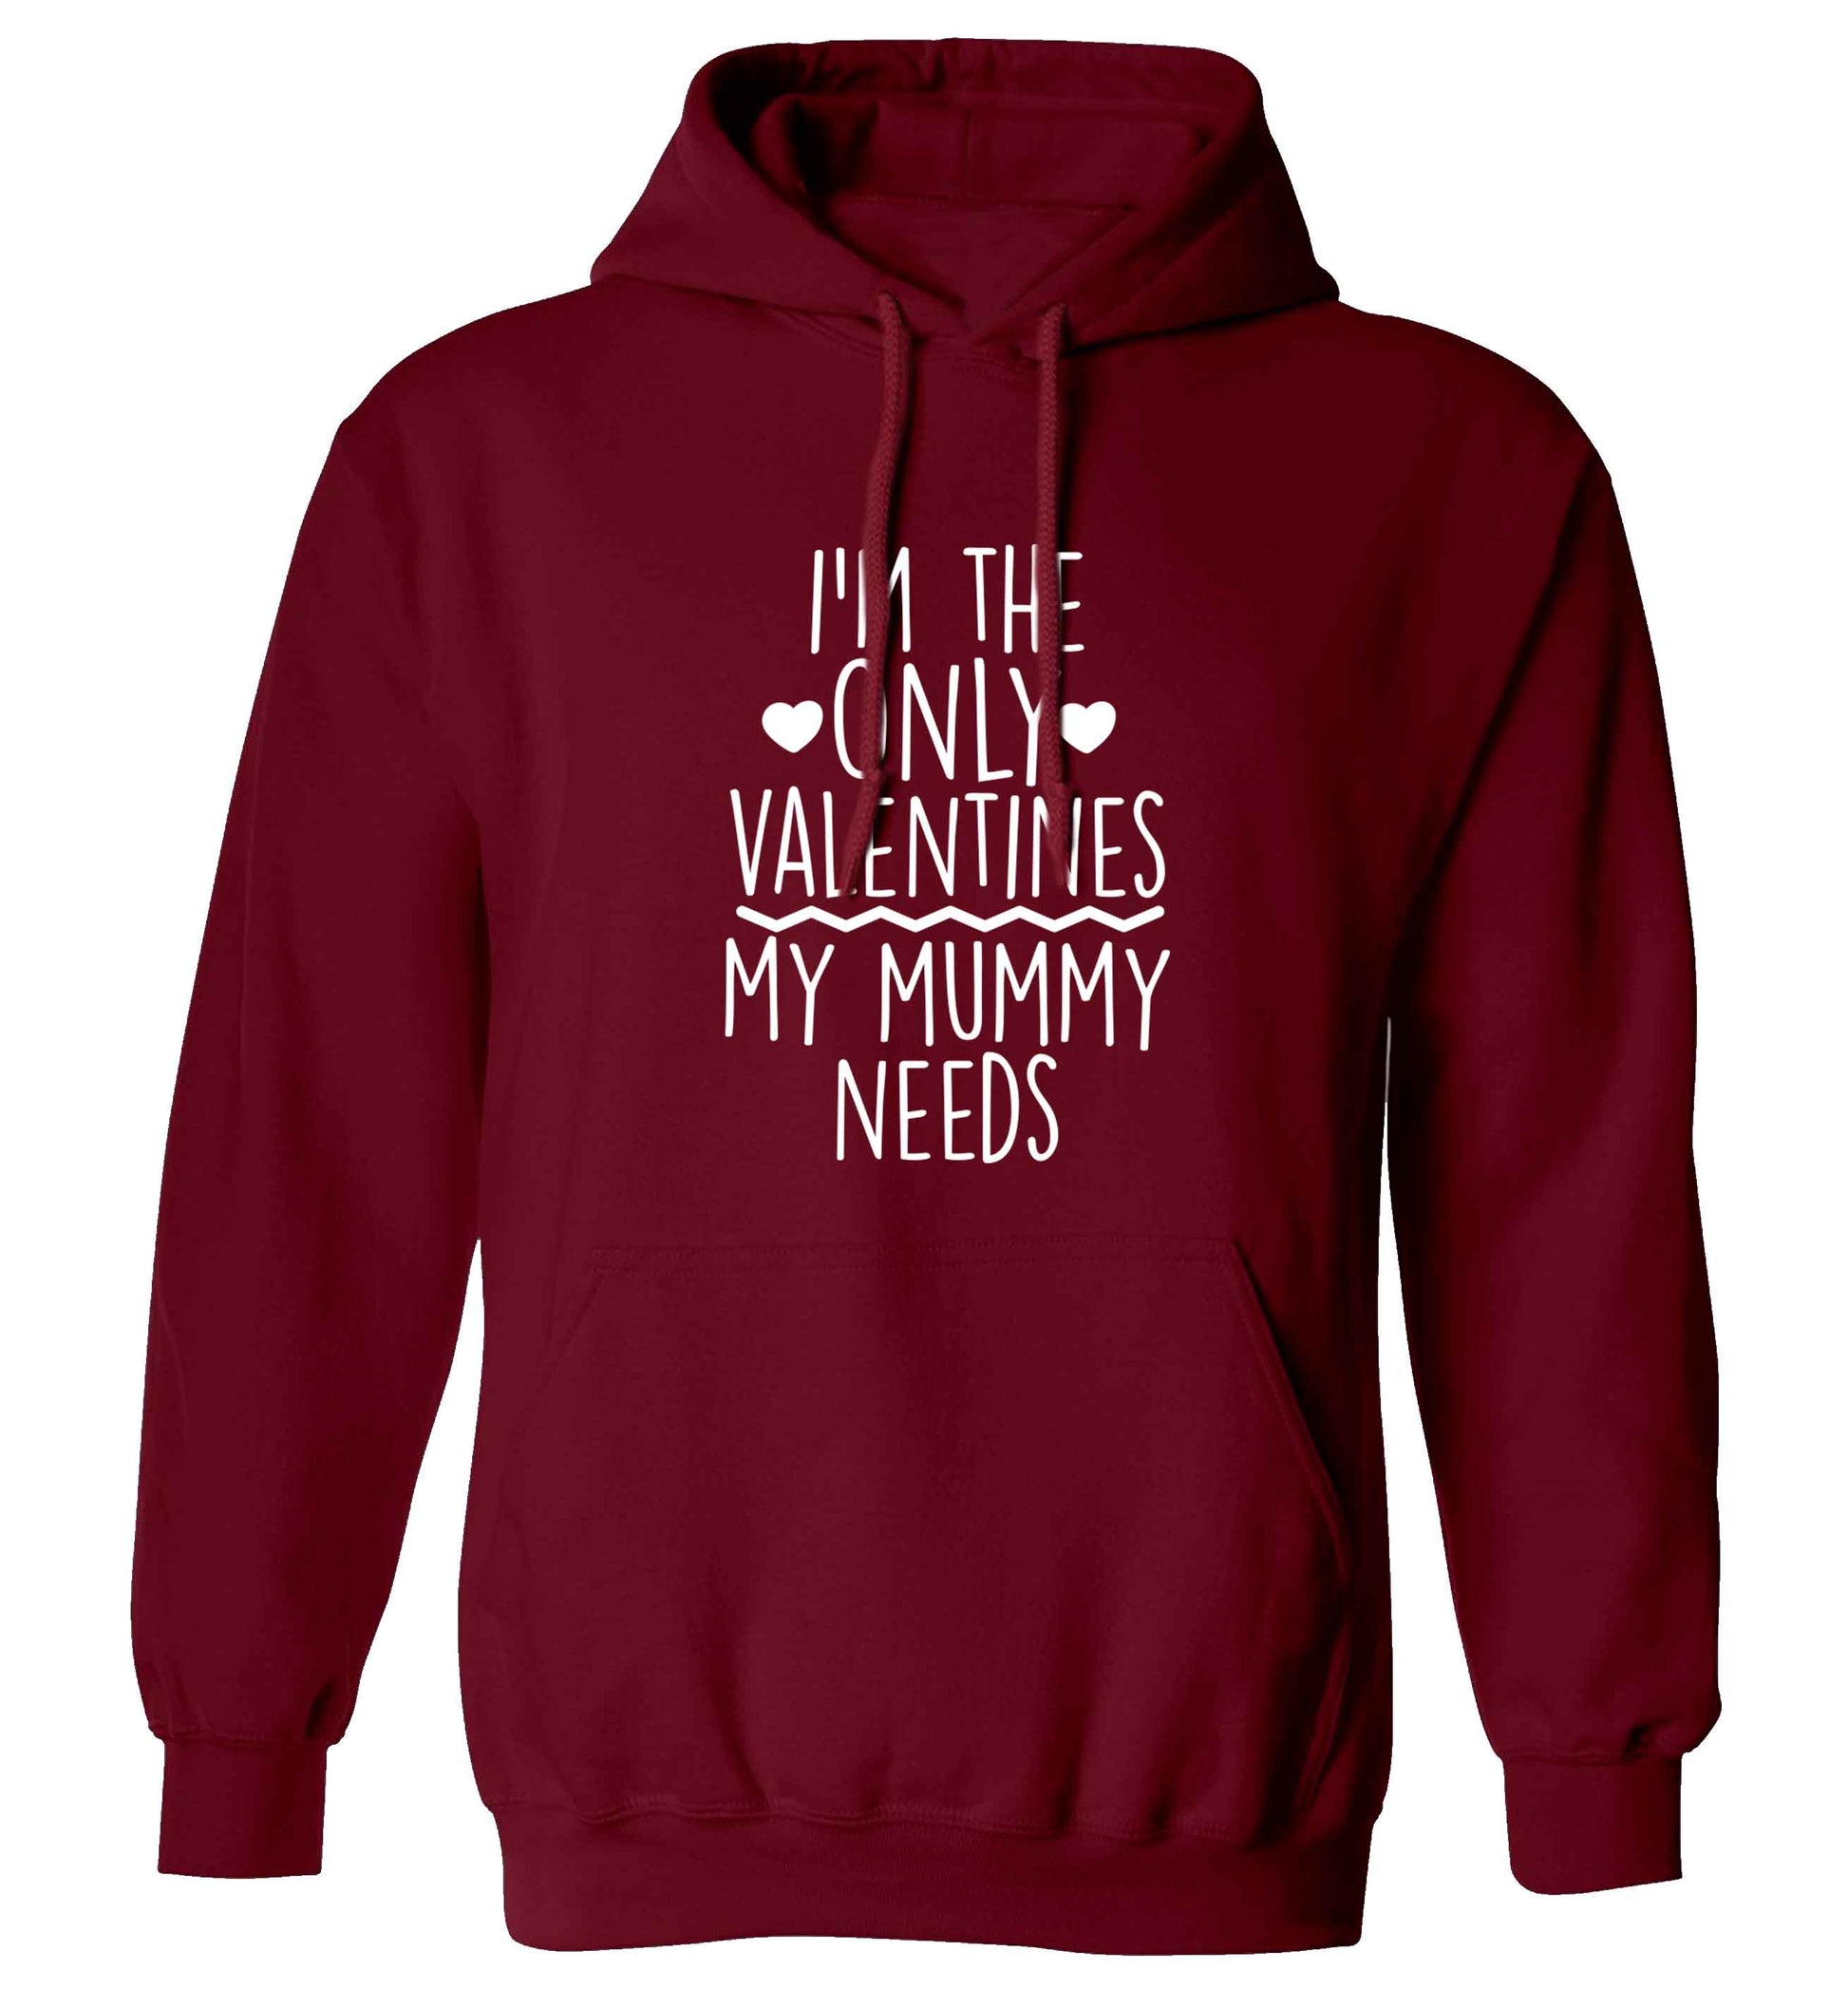 I'm the only valentines my mummy needs adults unisex maroon hoodie 2XL